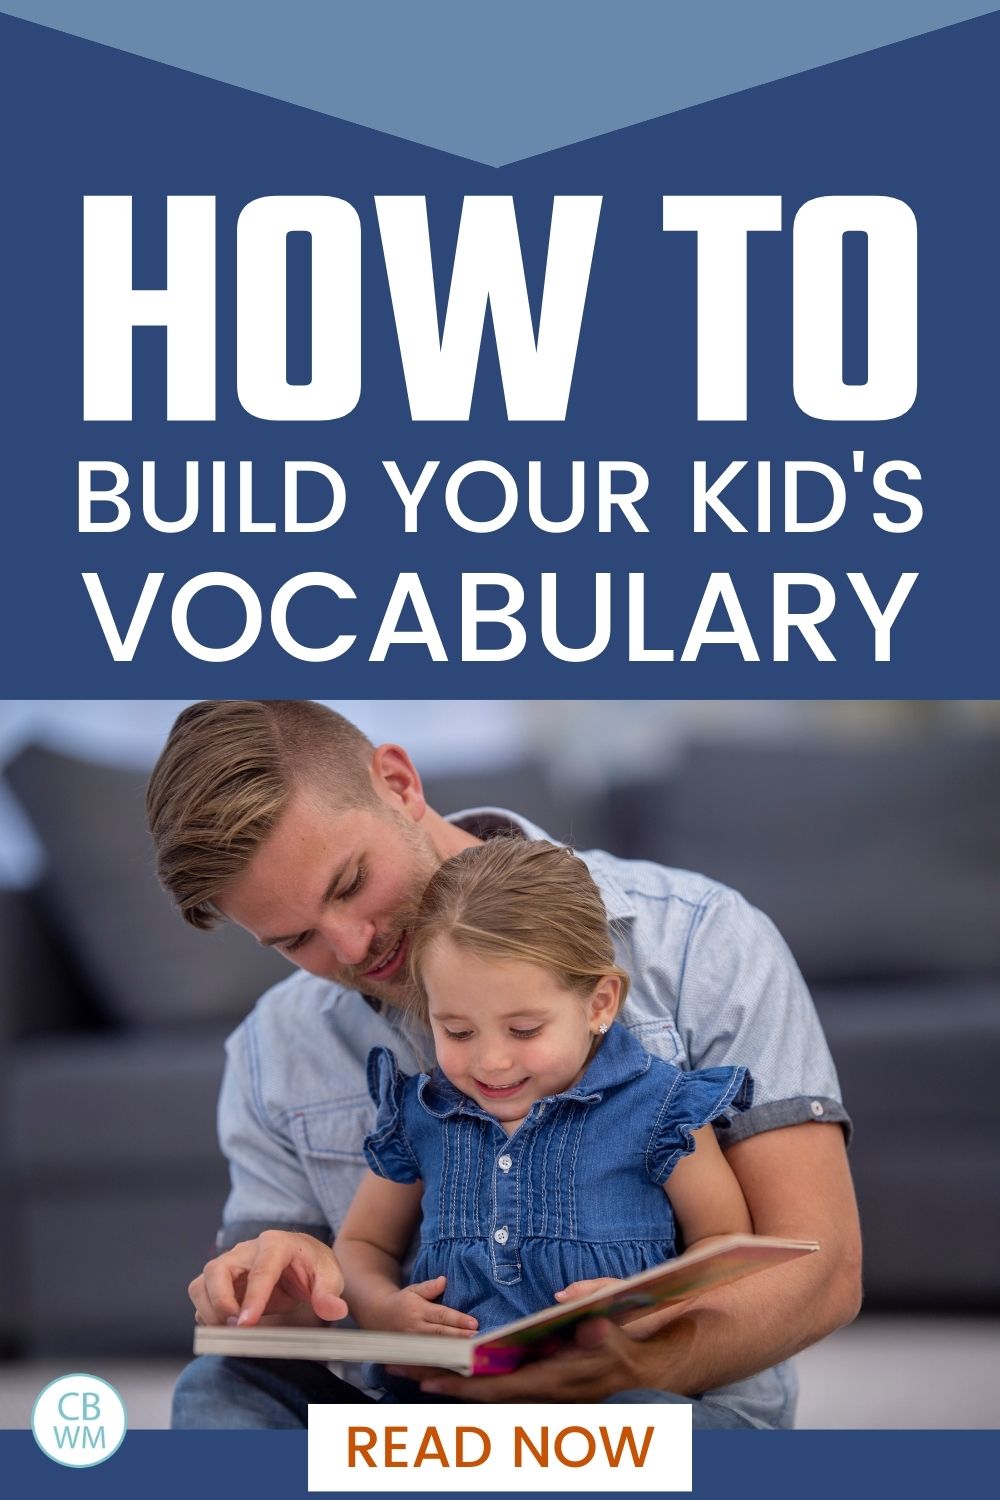 How to build vocabulary in kids